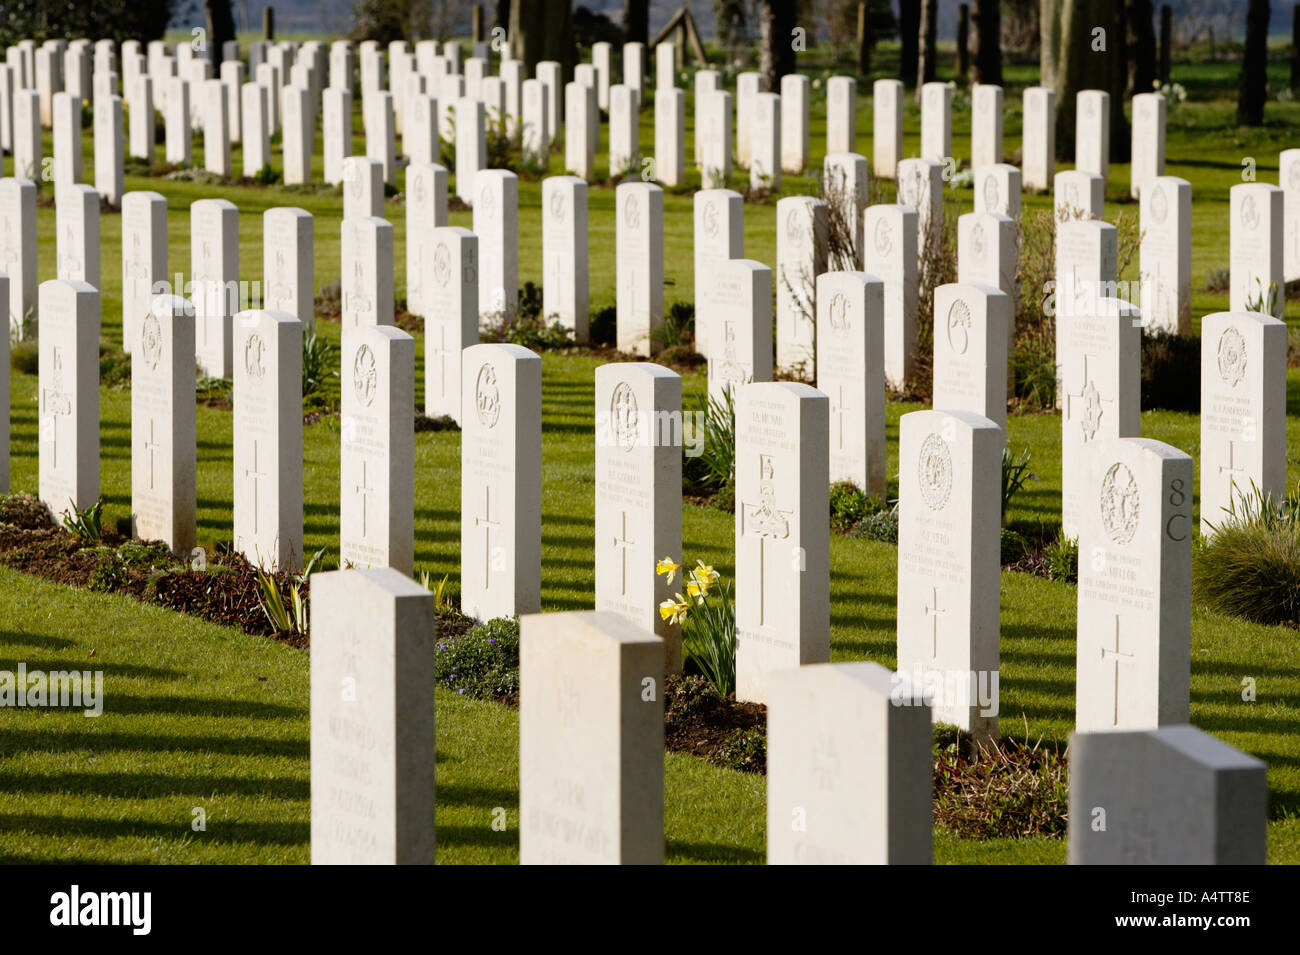 Rows of headstones at the Ryes British war cemetery - World War 2 - in Normandy, France Stock Photo